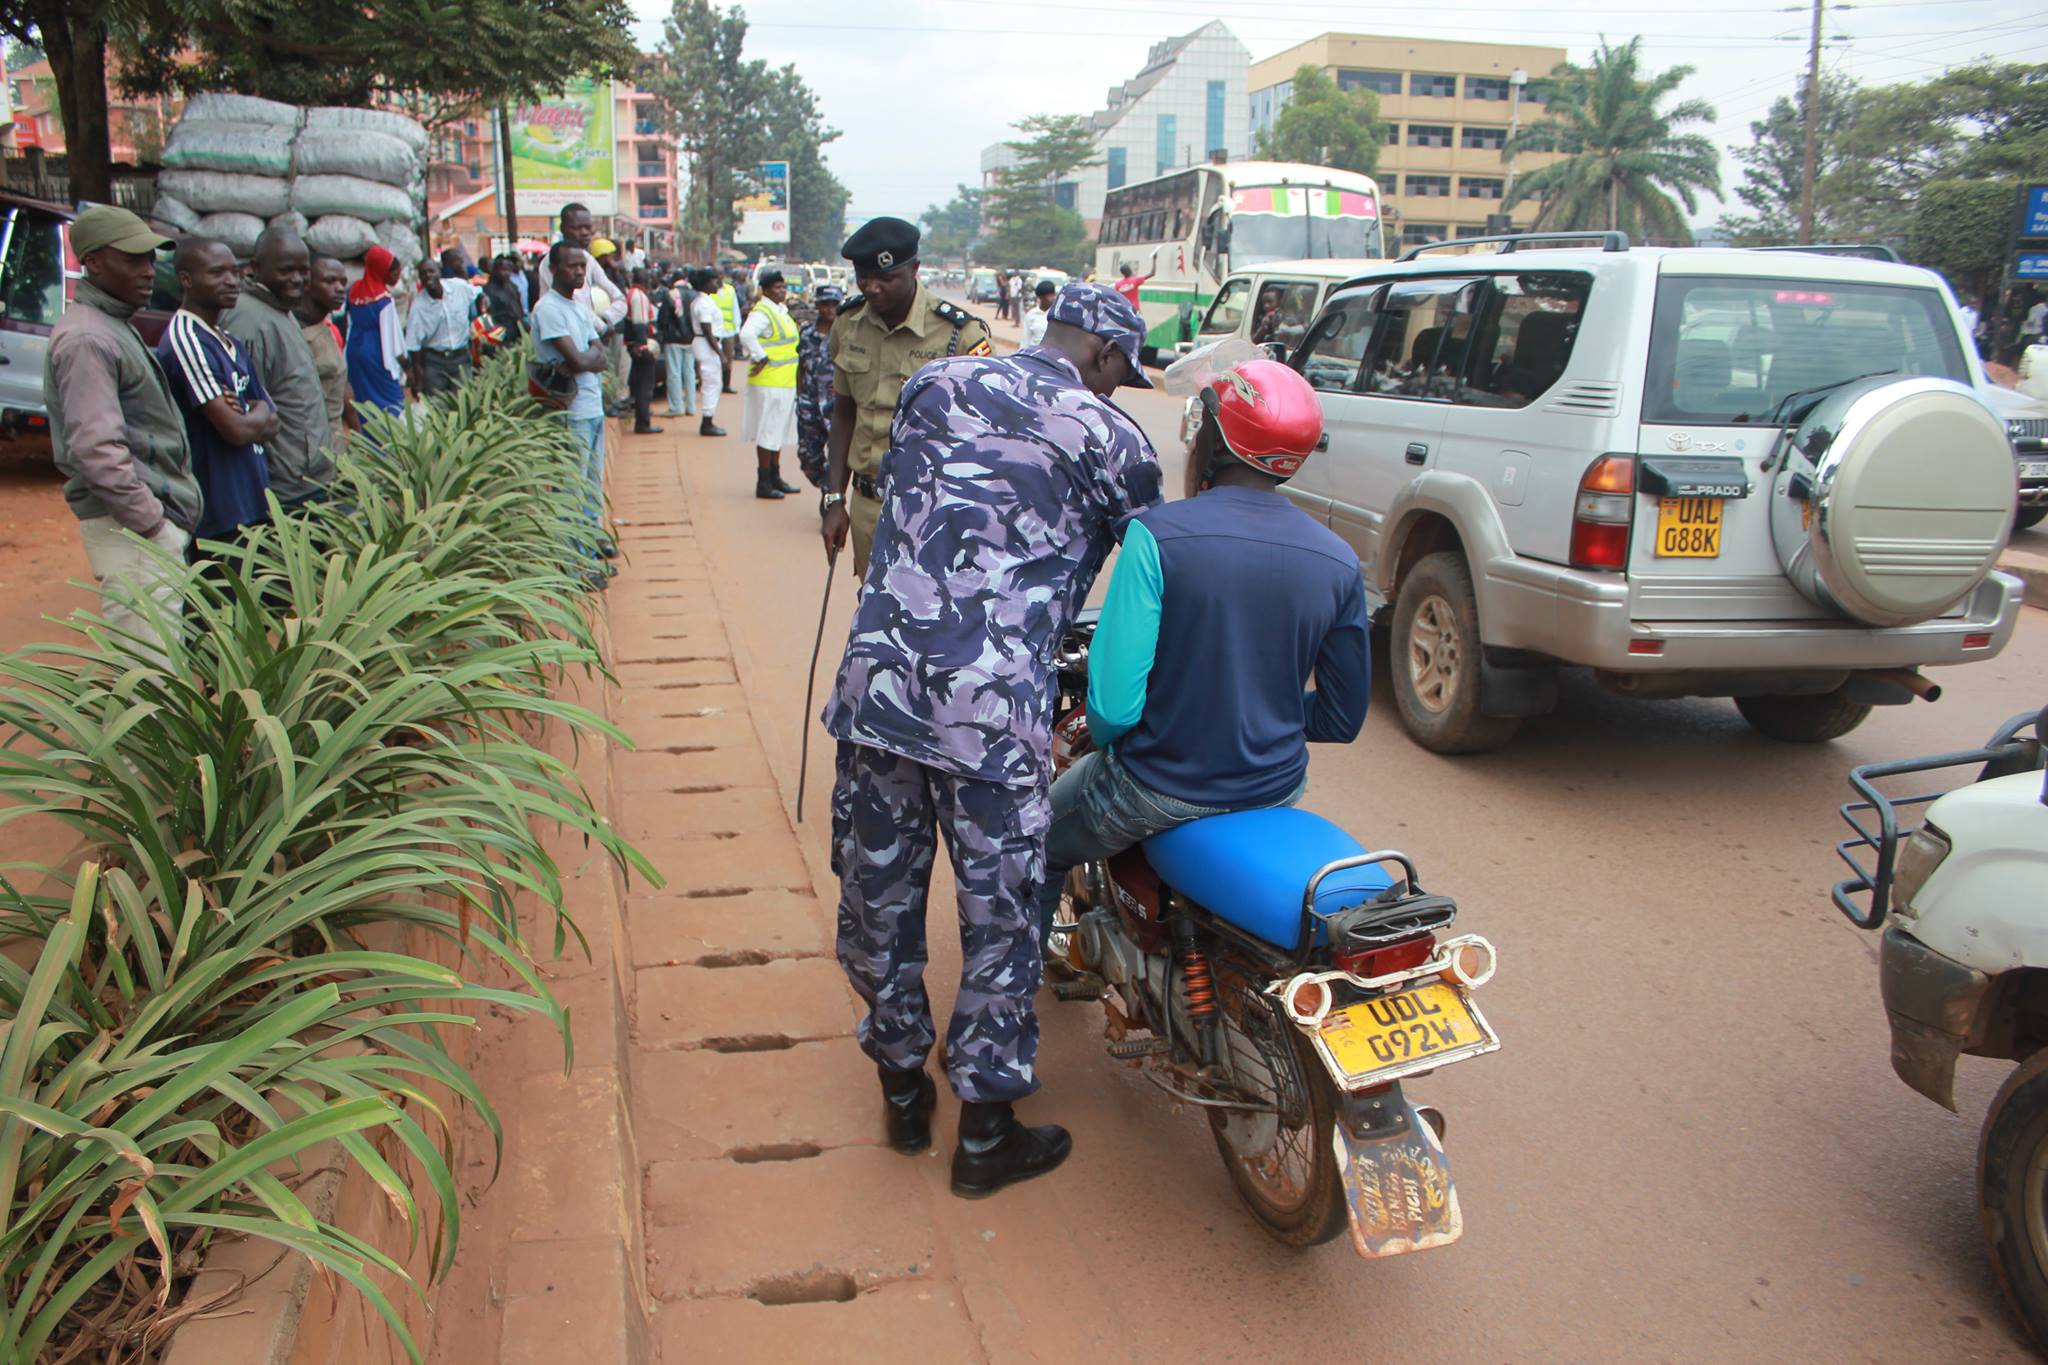 A police officer in the process of confiscating a boda while revellers look on.